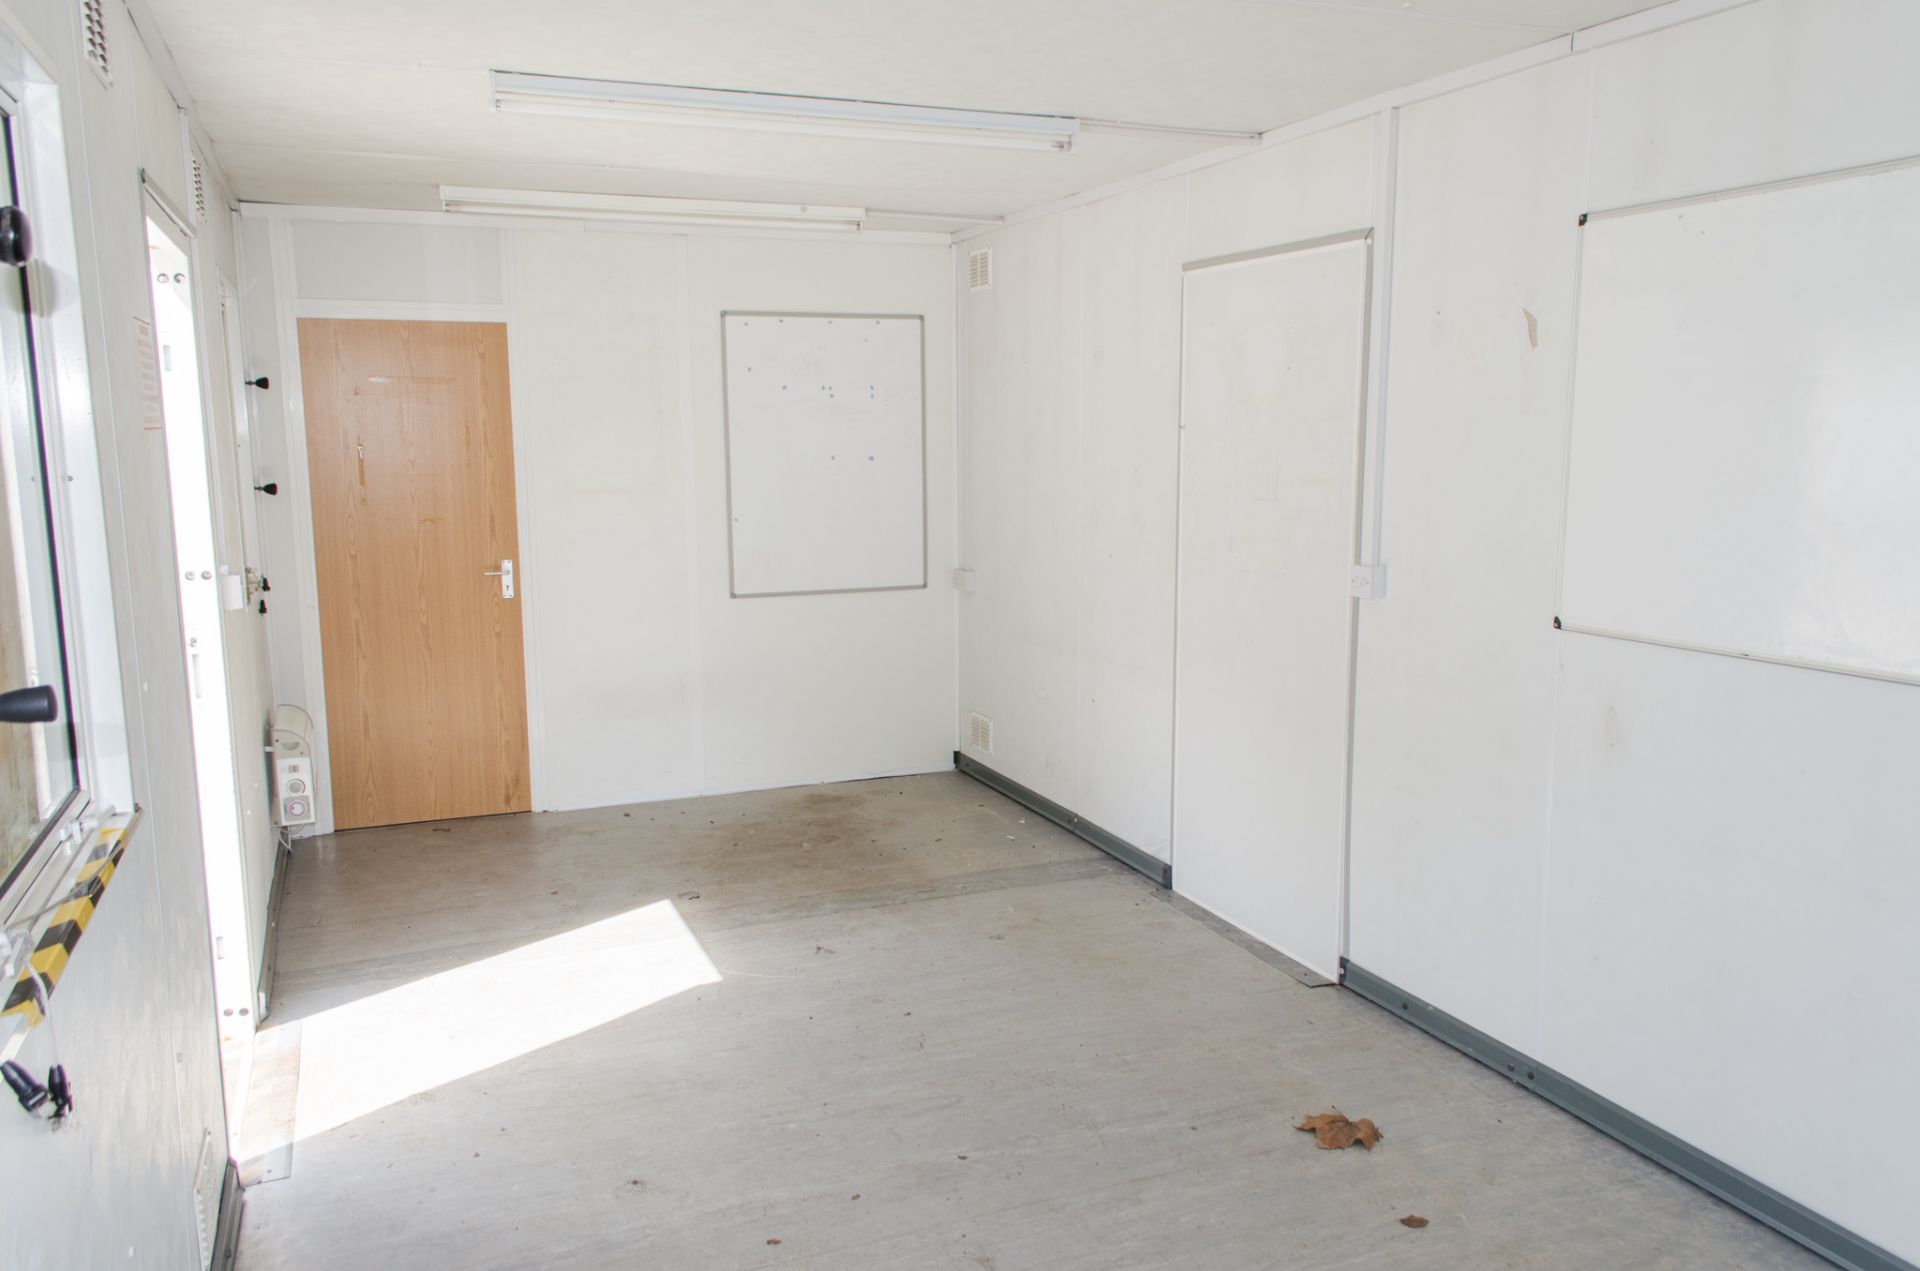 32 ft x 10 ft steel anti vandal jack leg office site unit Comprising of: Office/canteen area & - Image 6 of 7